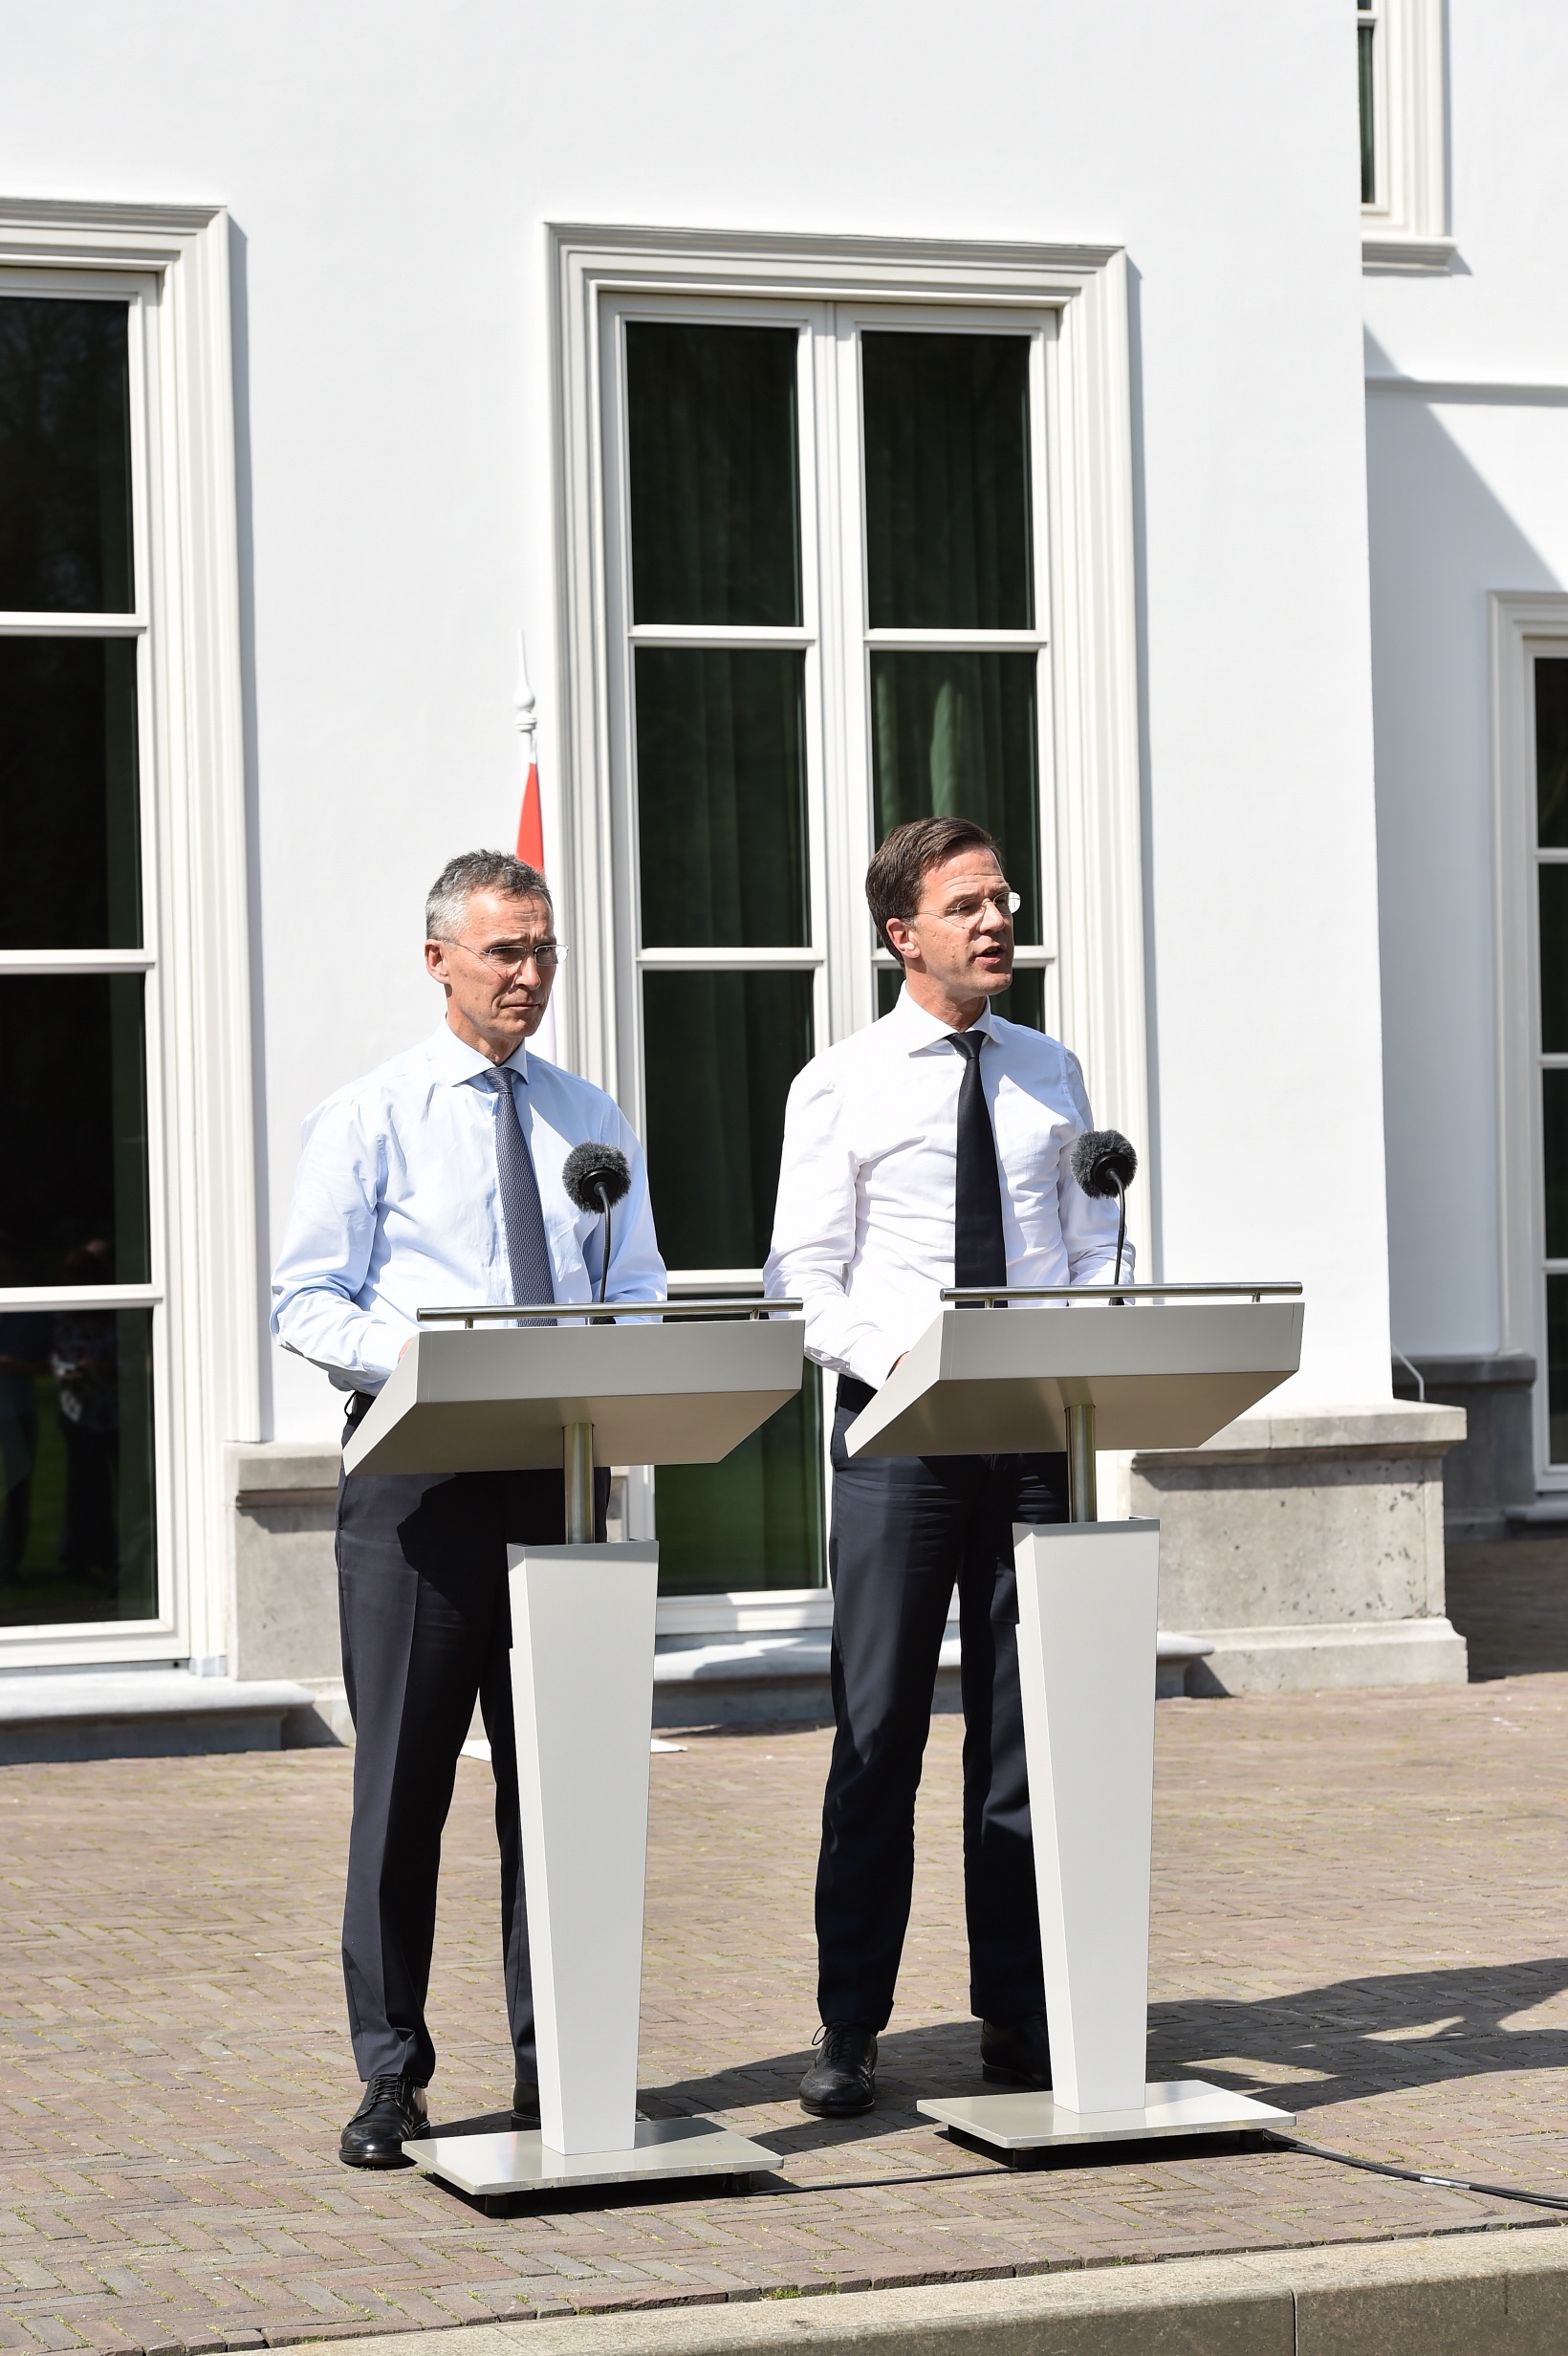 Joint press conference with NATO Secretary General Jens Stoltenberg and the Prime Minister of the Netherlands, Mark Rutte